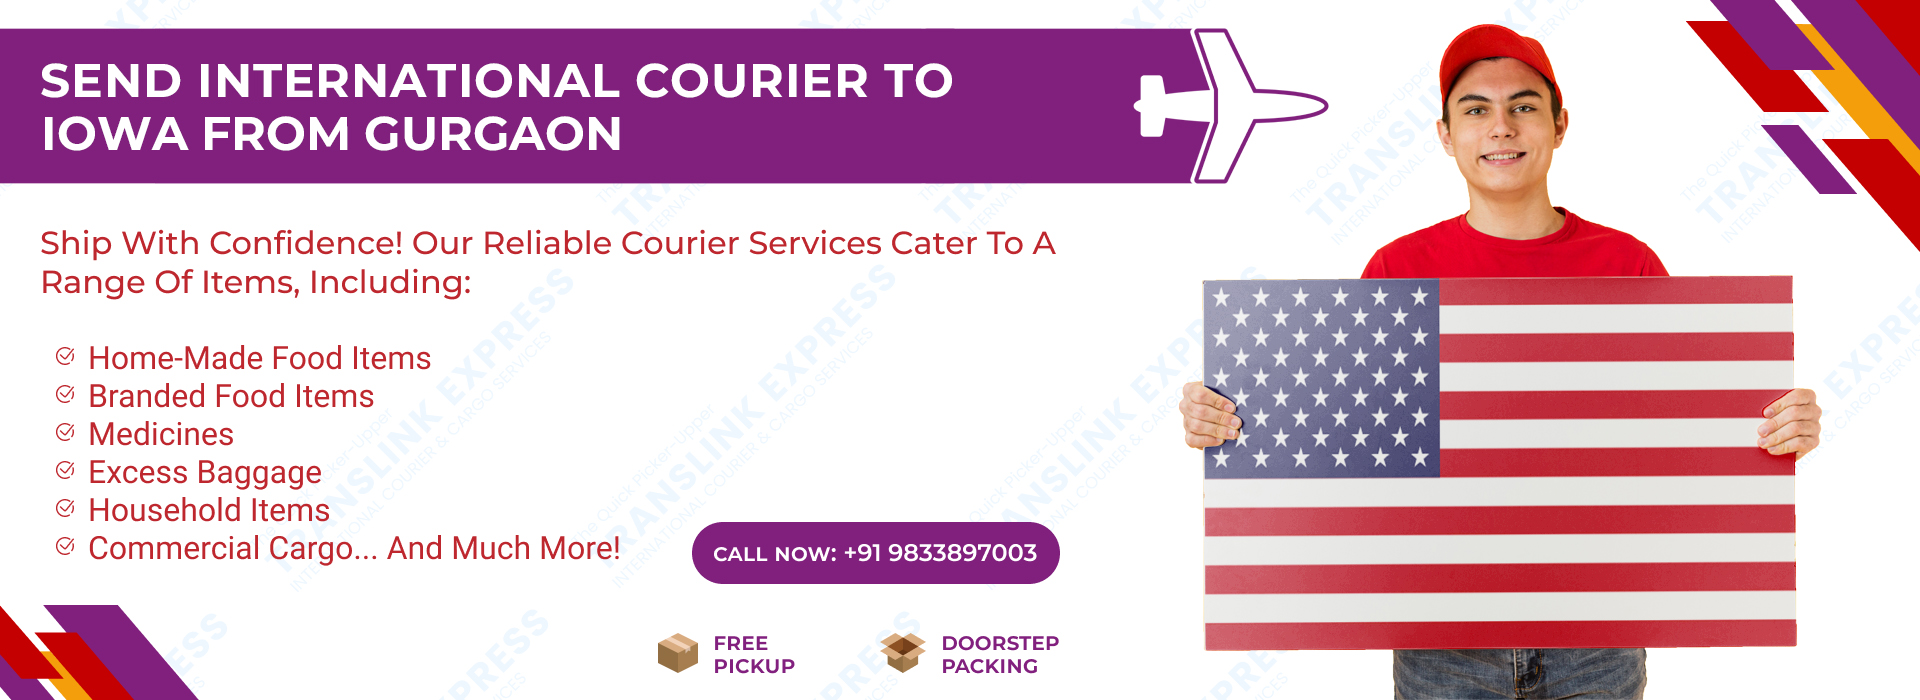 Courier to Iowa From Gurgaon